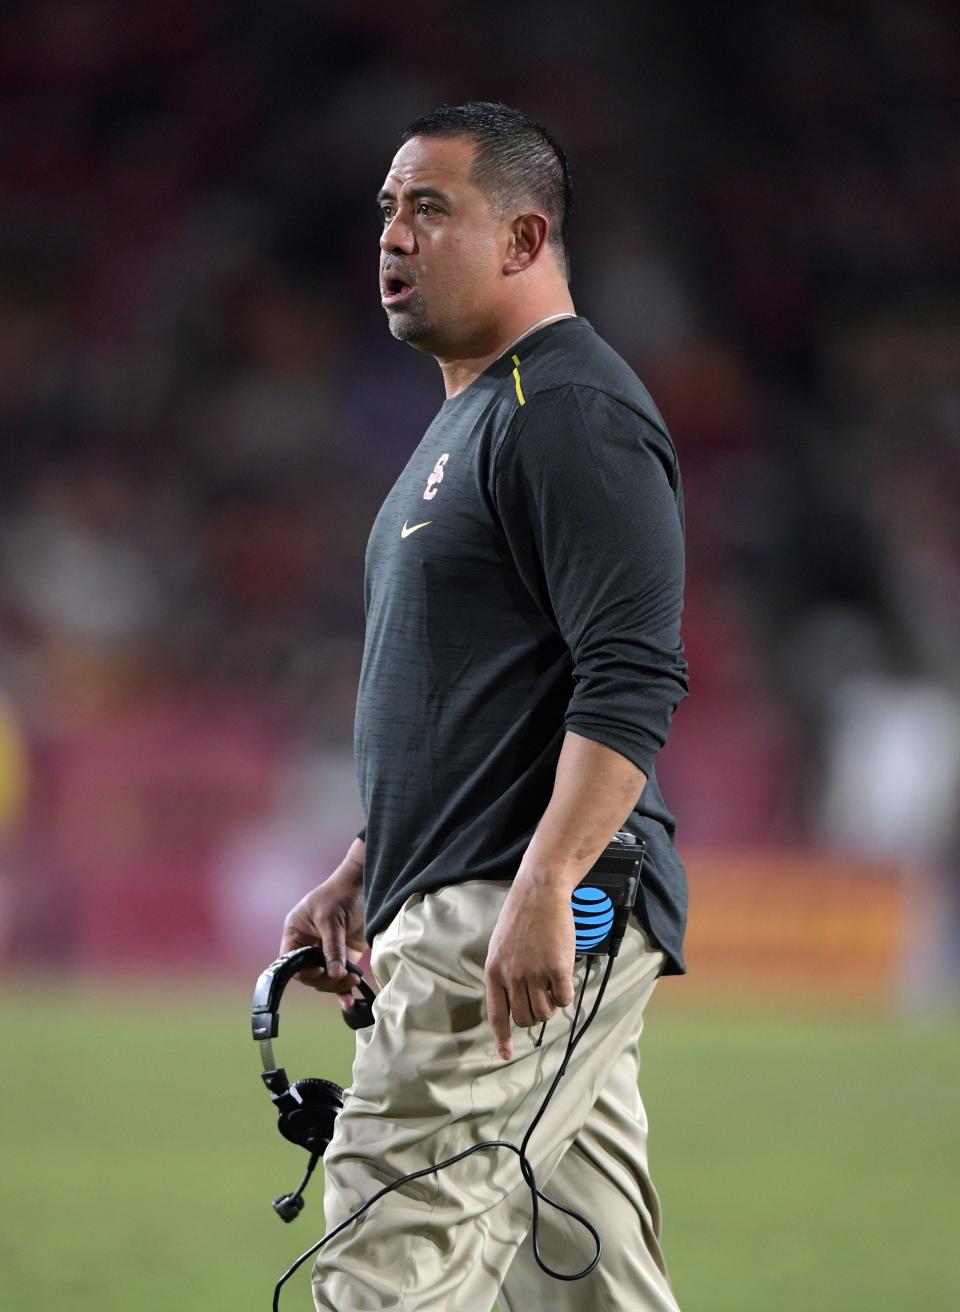 Johnny Nansen will join the Texas football program as its co-defensive coordinator and linebackers coach. He worked with Texas head coach Steve Sarkisian at both Washington and USC, and he spent the past two seasons as defensive coordinator for Arizona.